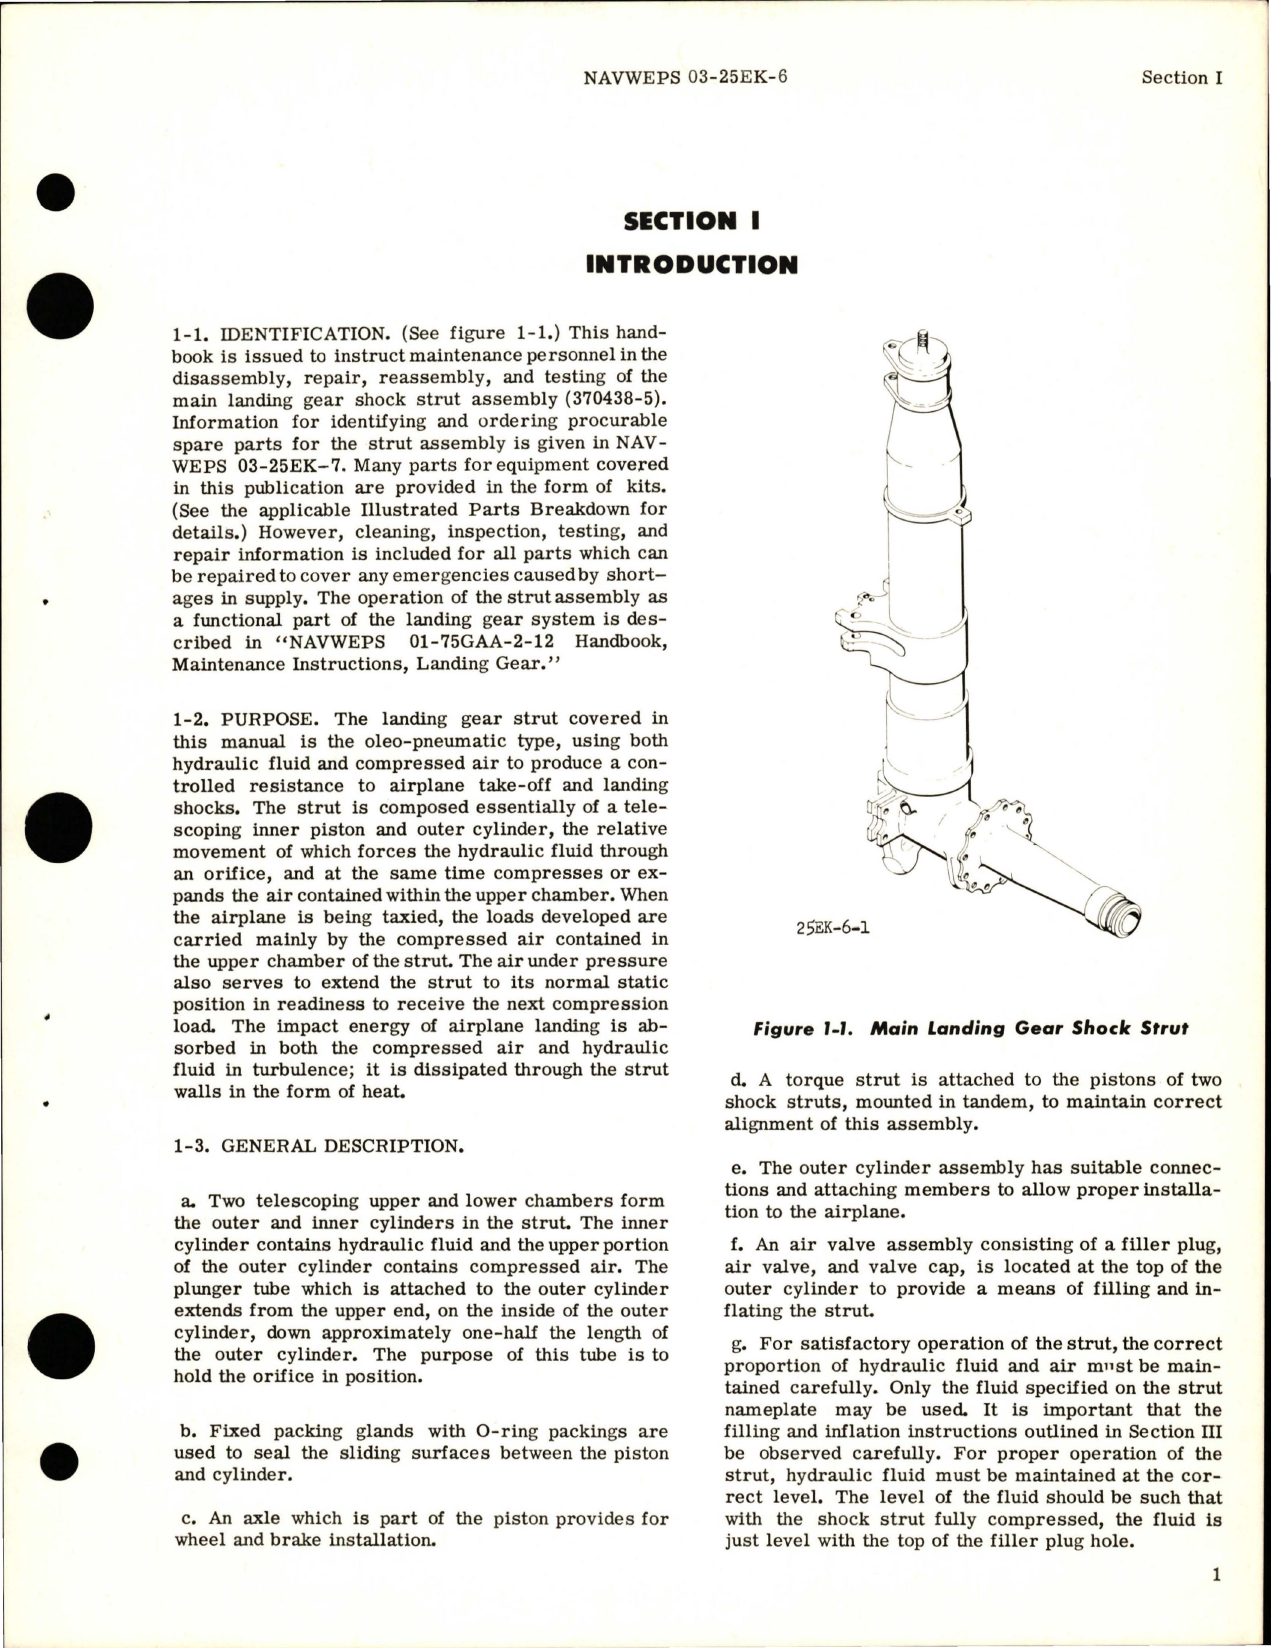 Sample page 5 from AirCorps Library document: Overhaul Instructions for Main Landing Gear Shock Strut Assembly - Part 370438-5 and 380101-1